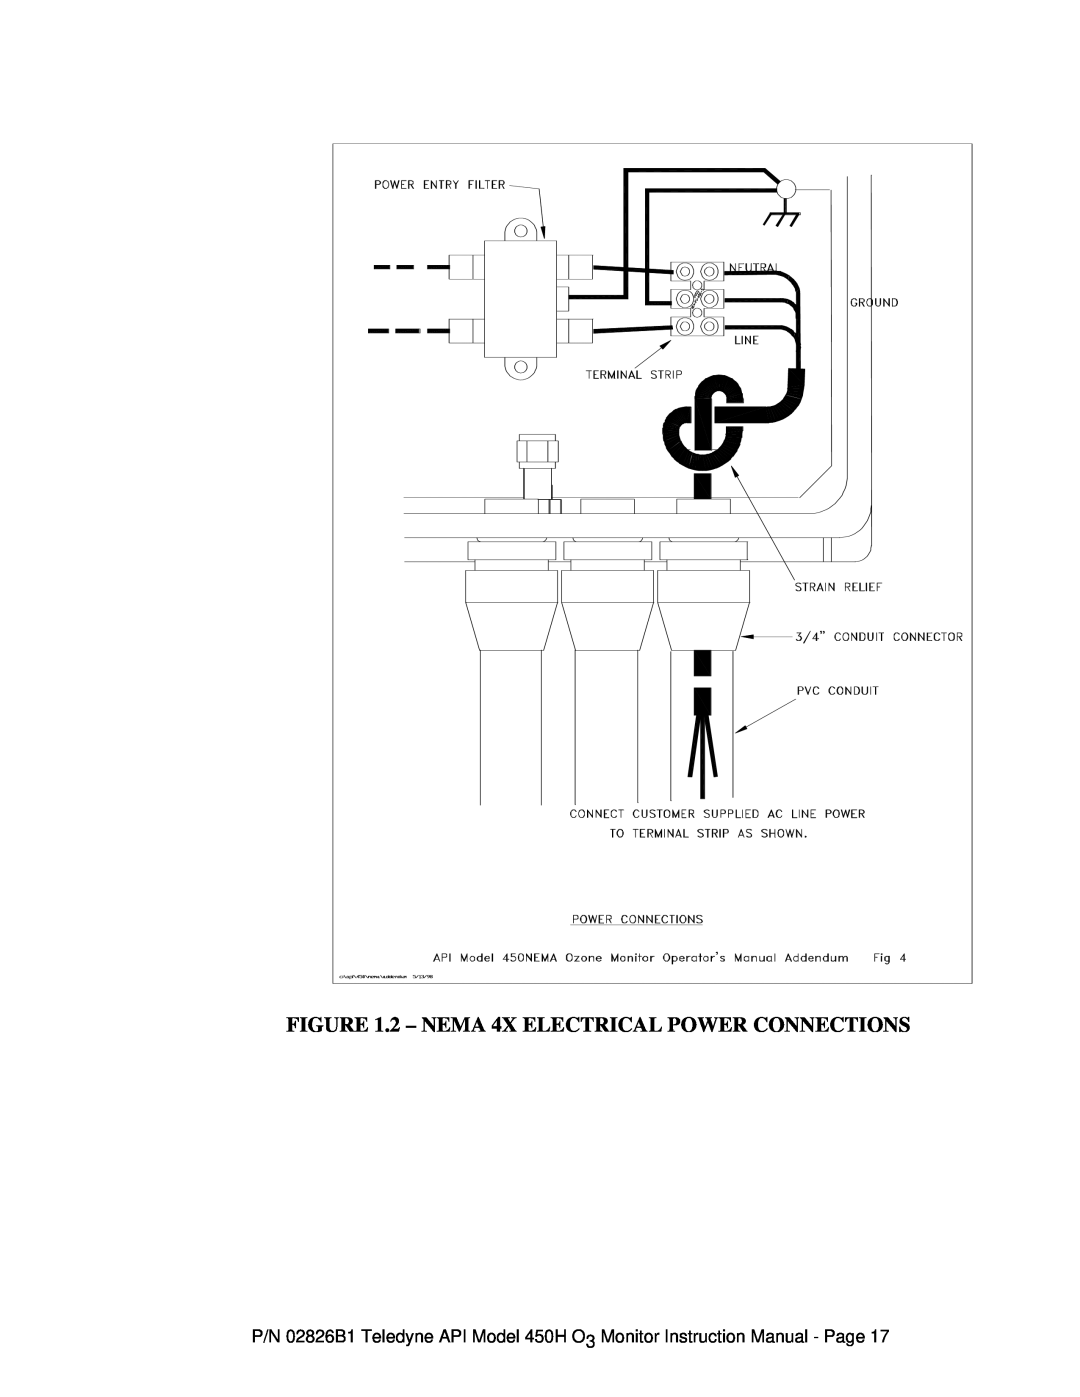 Teledyne 450H instruction manual 2 - NEMA 4X ELECTRICAL POWER CONNECTIONS 